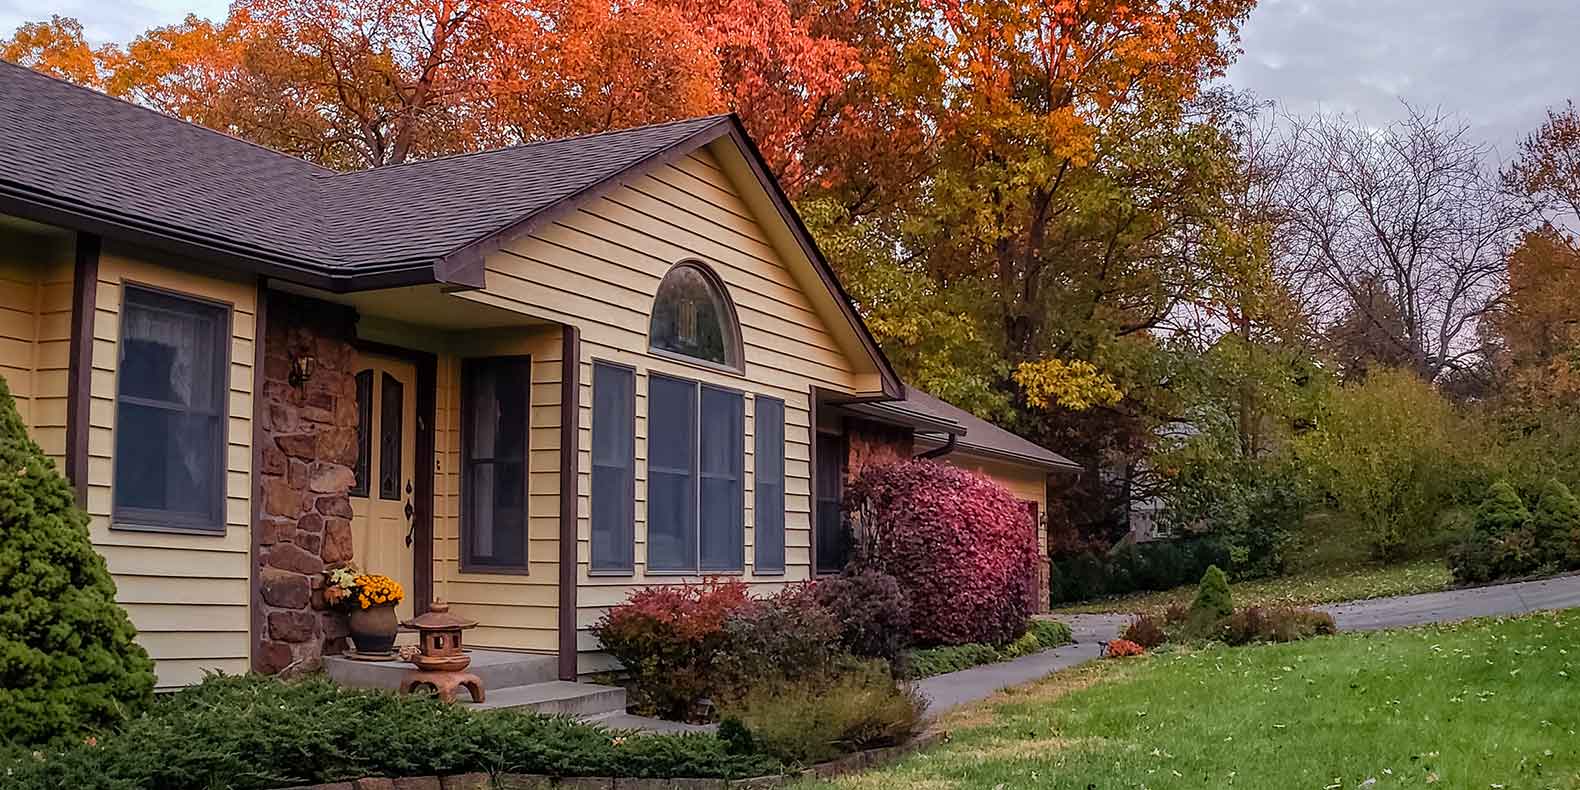 Maintain Home Security in Autumn